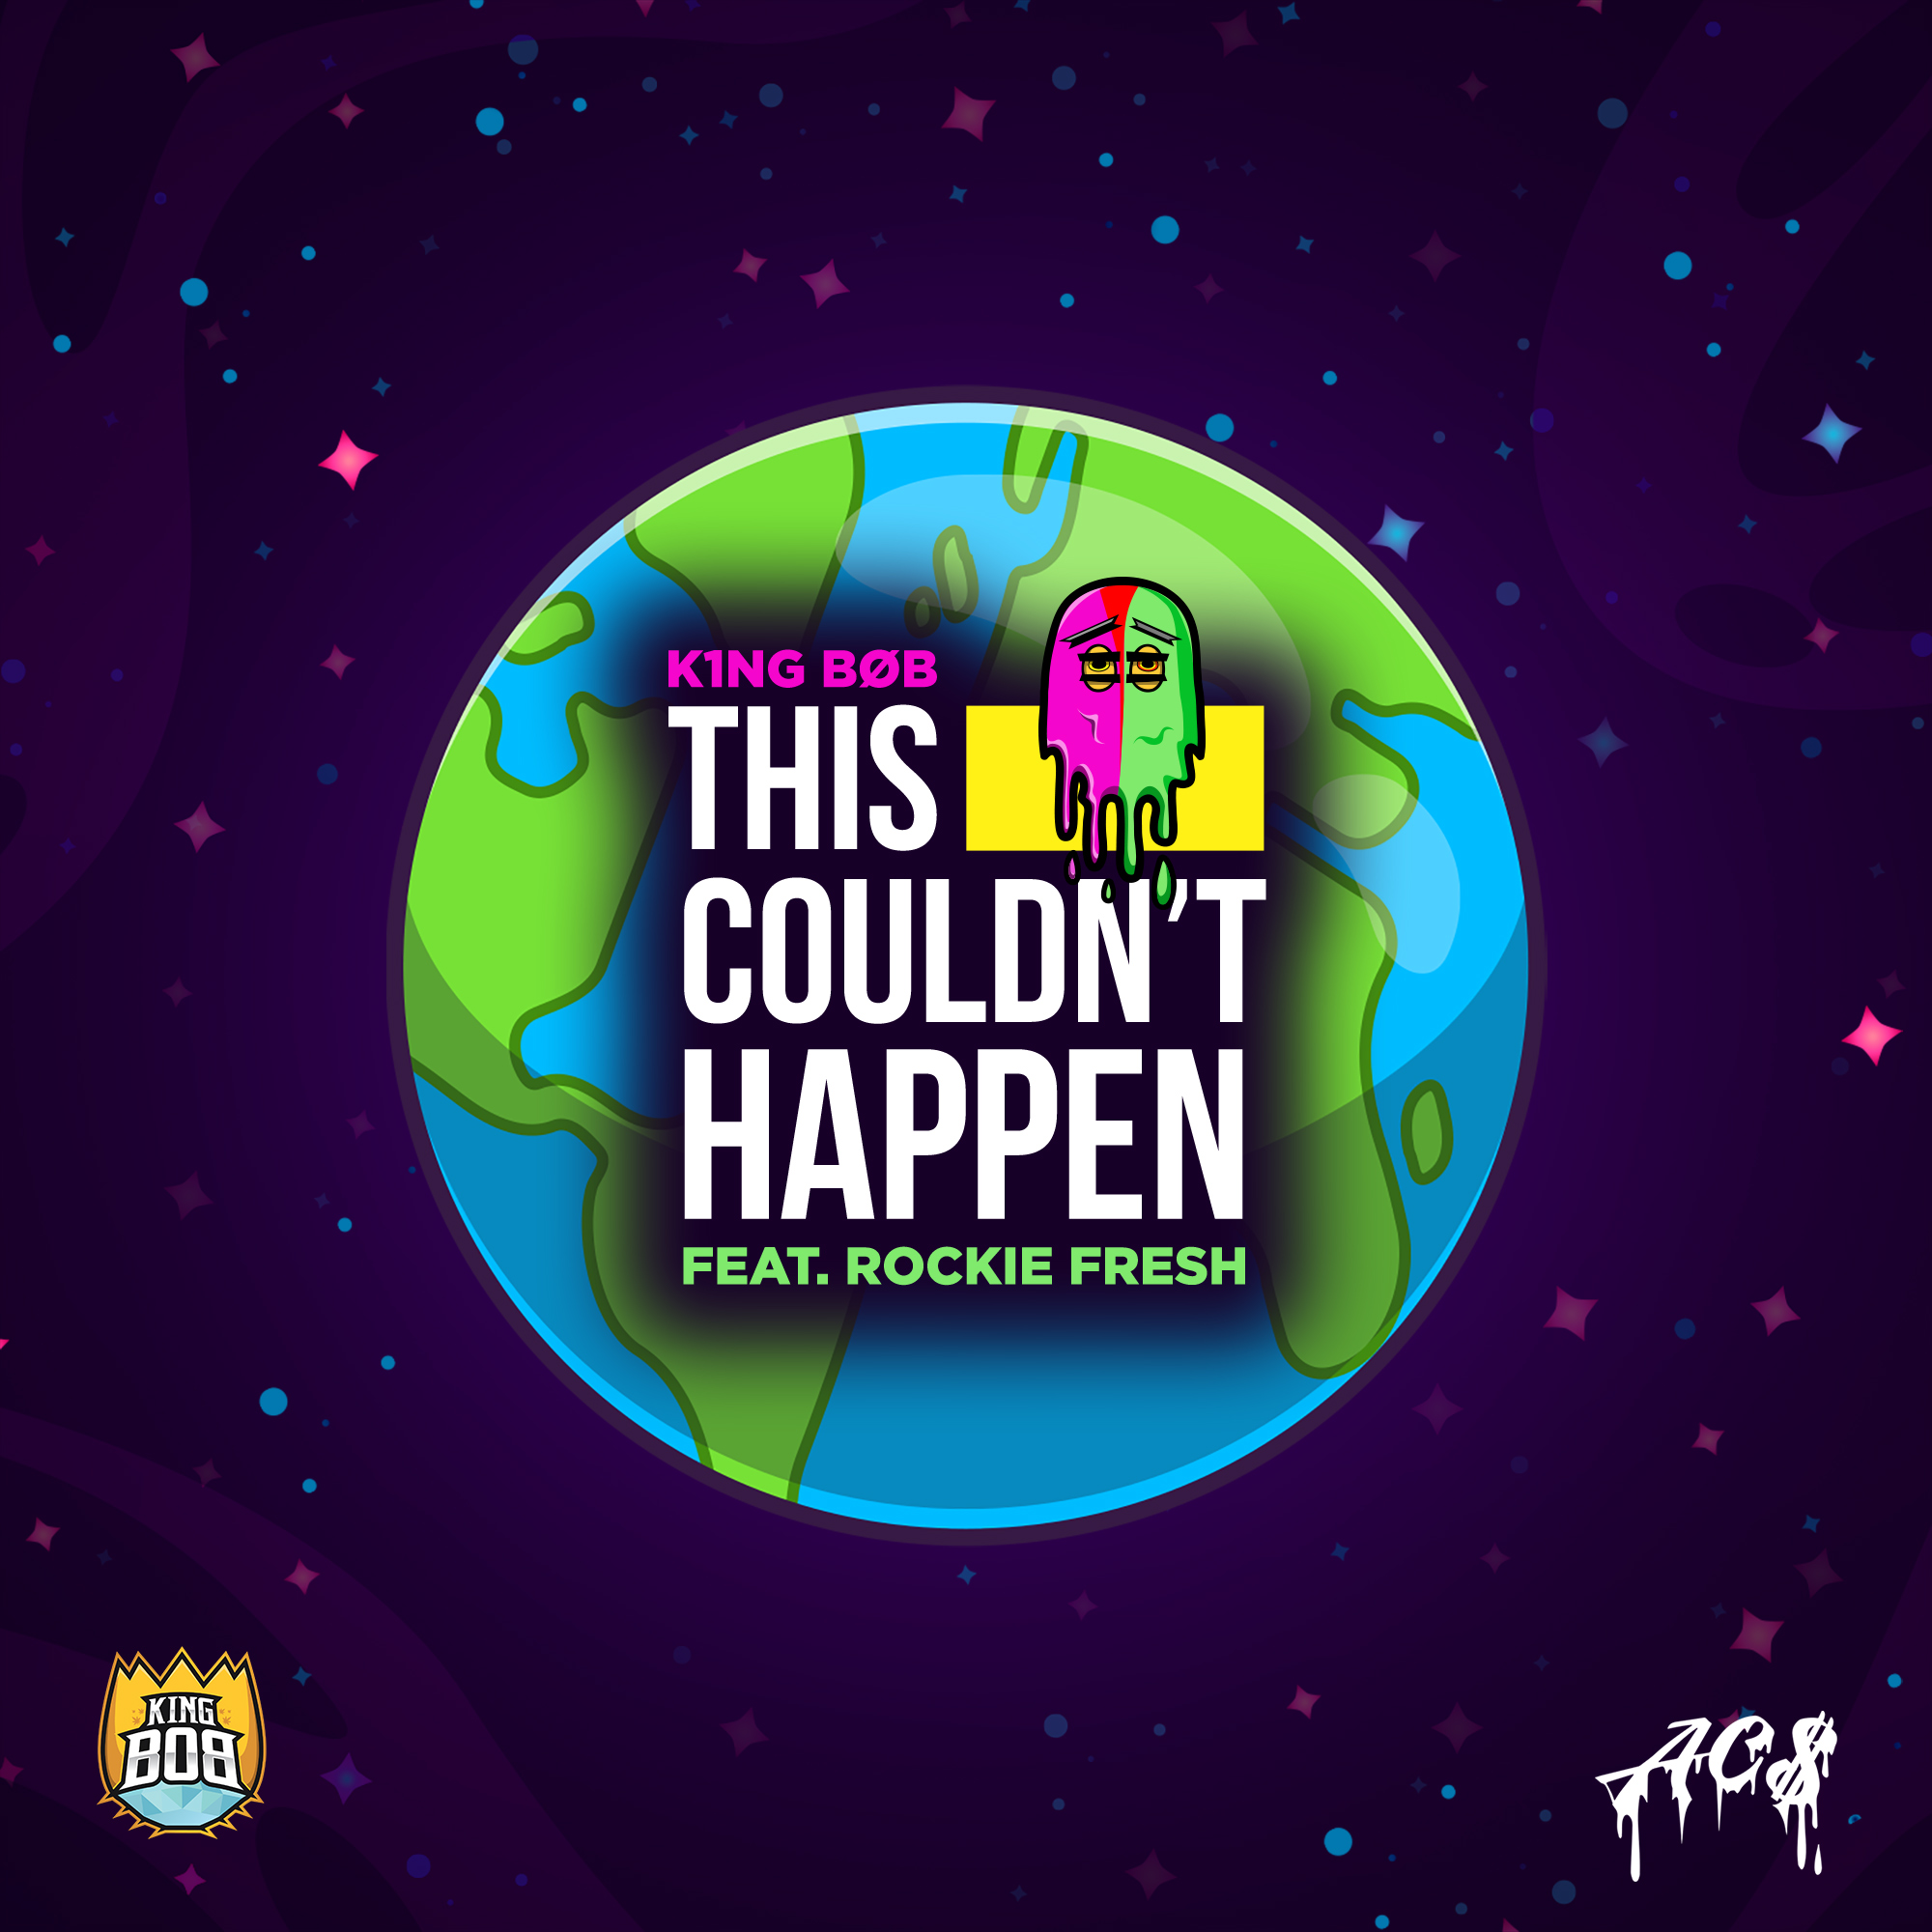 K1ng B0b & Rockie Fresh Joins Forces on New Song 'This Couldn't Happen'